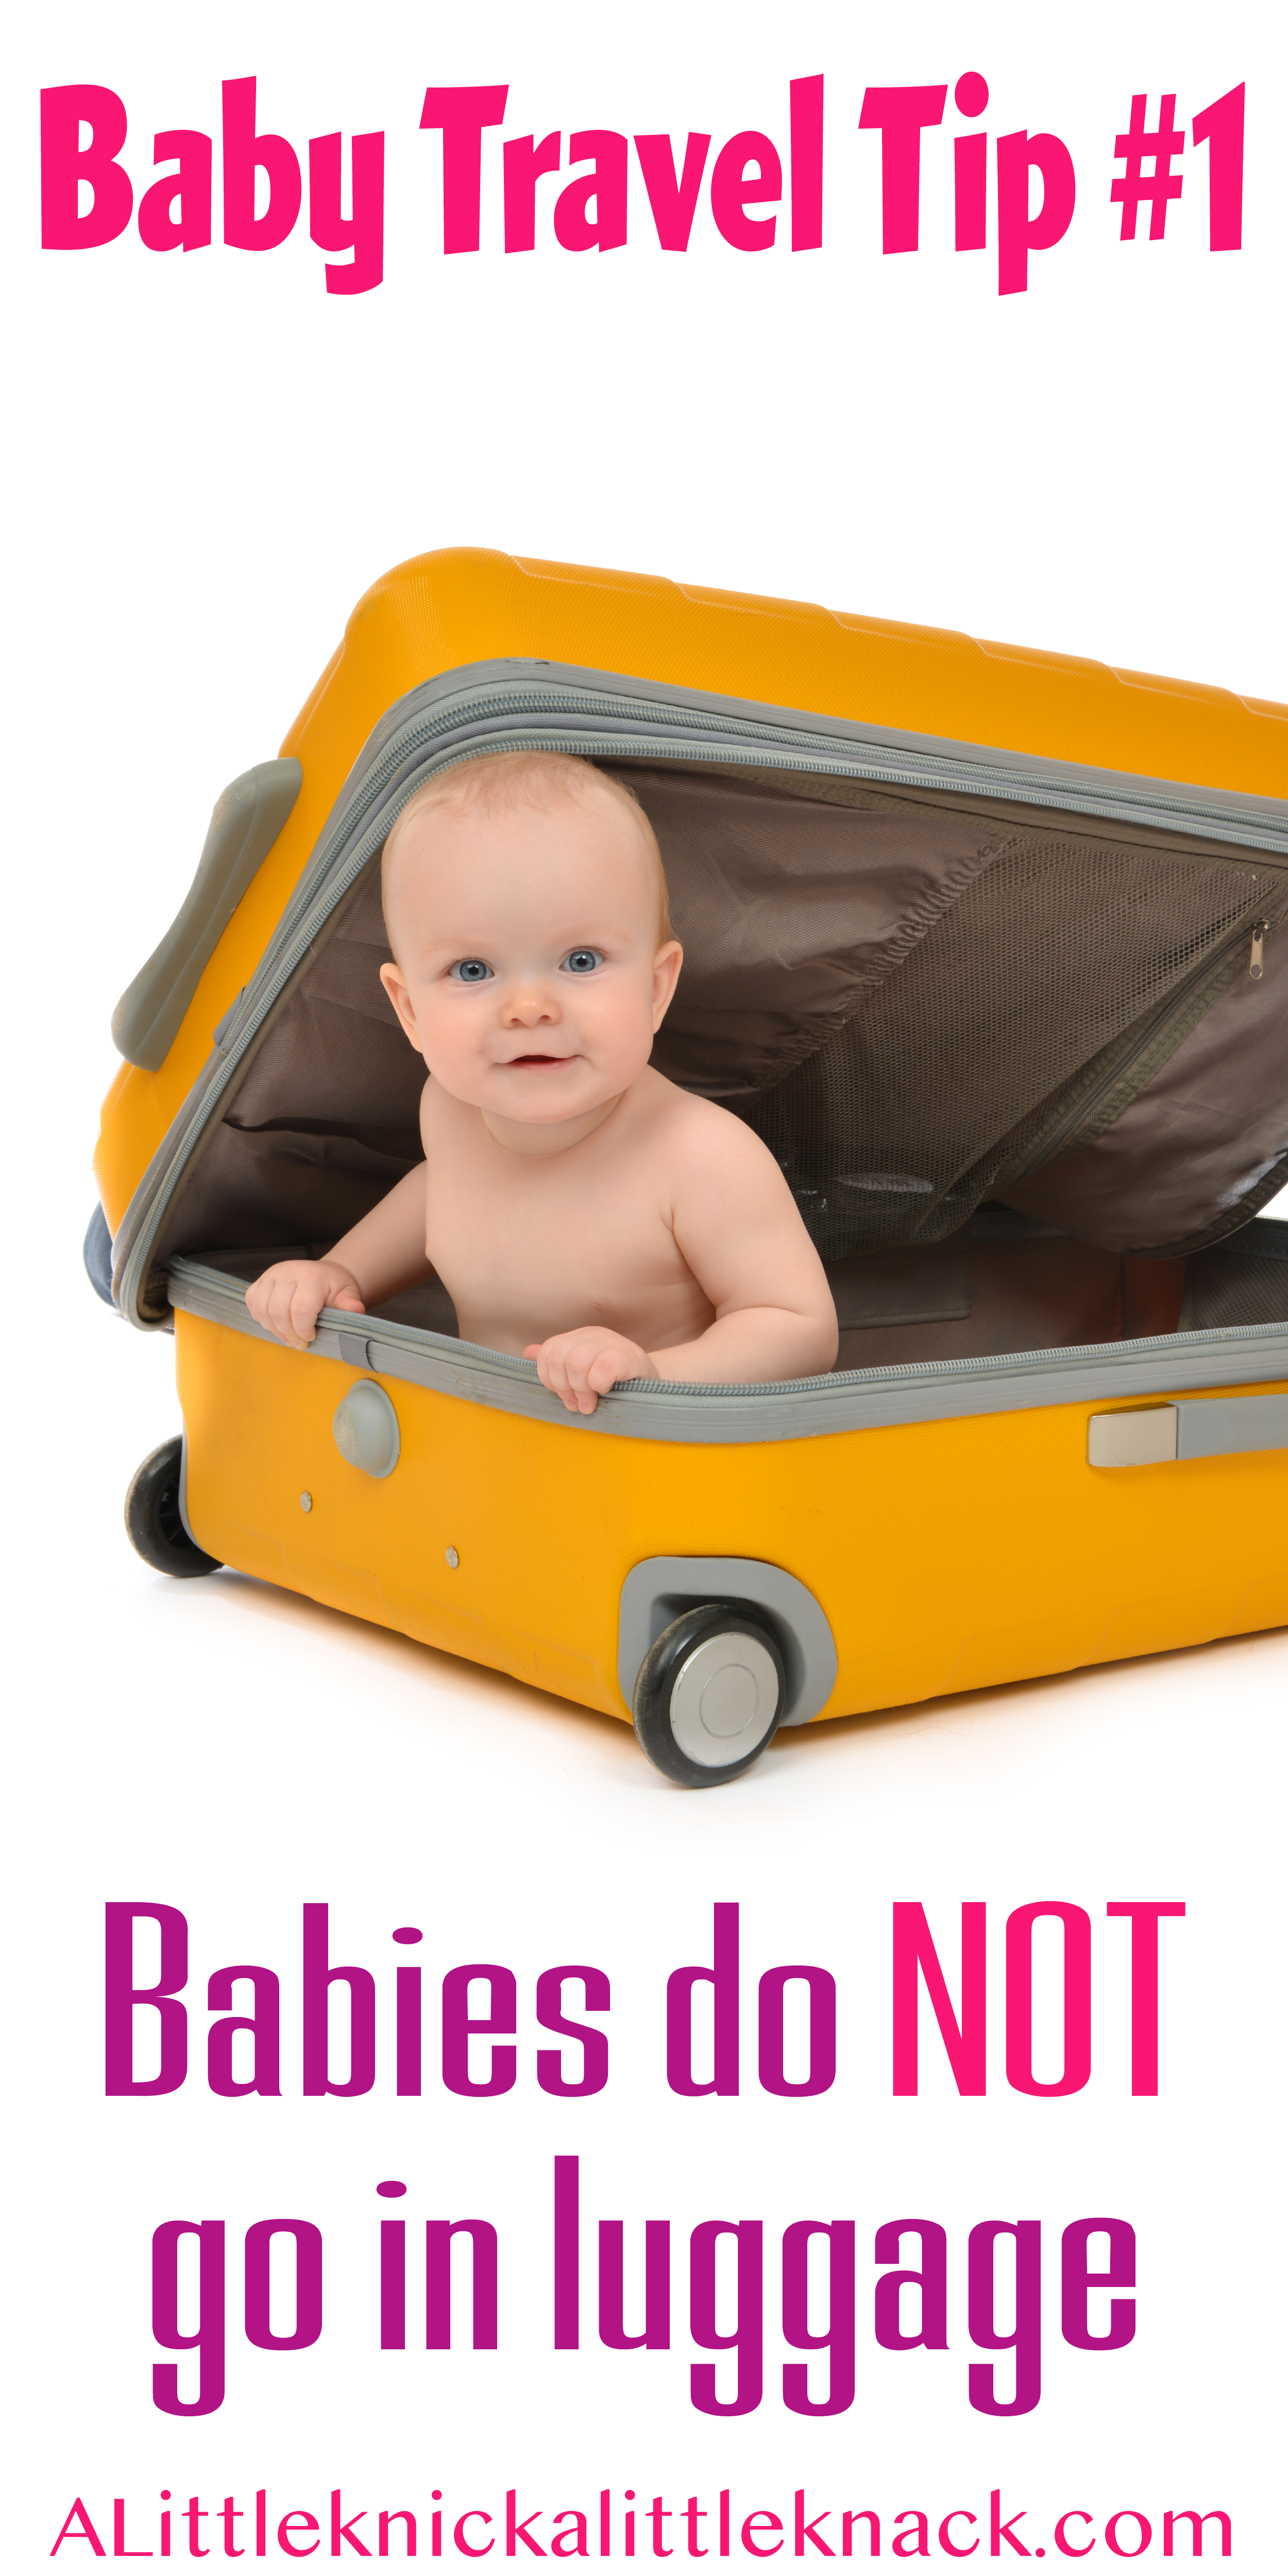 A baby in a yellow suitcase with a text overlay